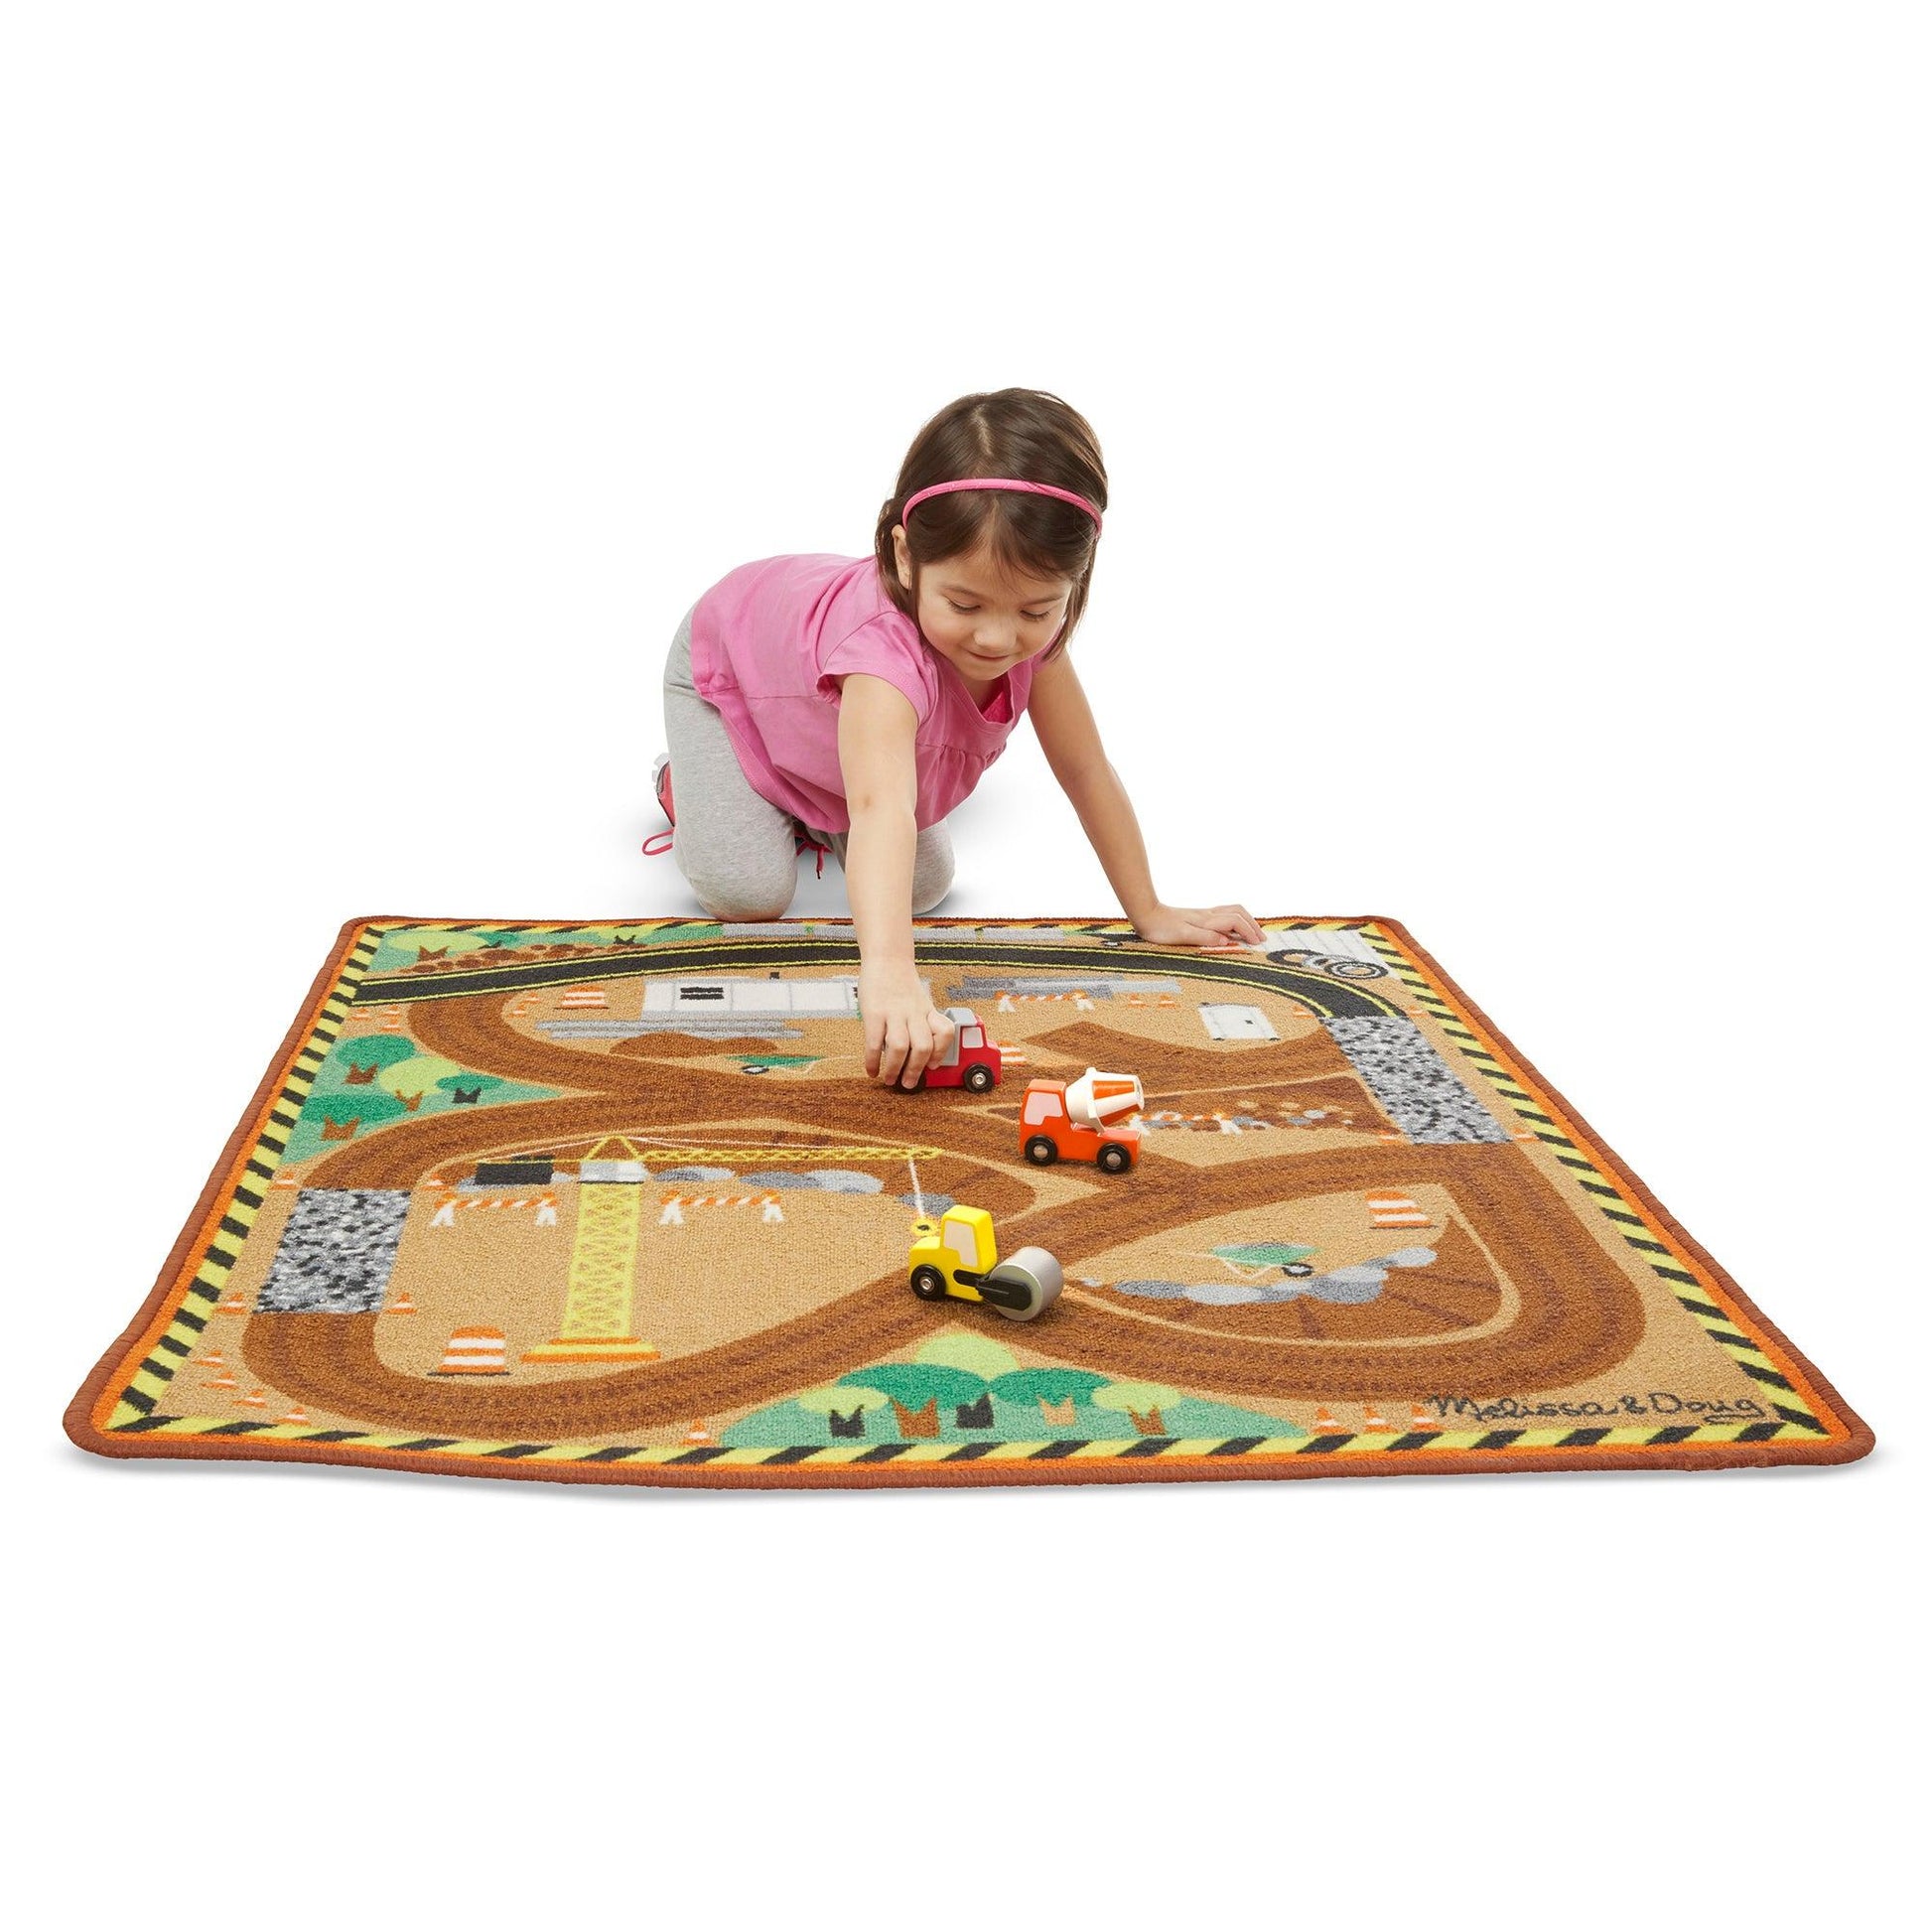 Round the Construction Zone Work Site Rug & Vehicle Set - Loomini